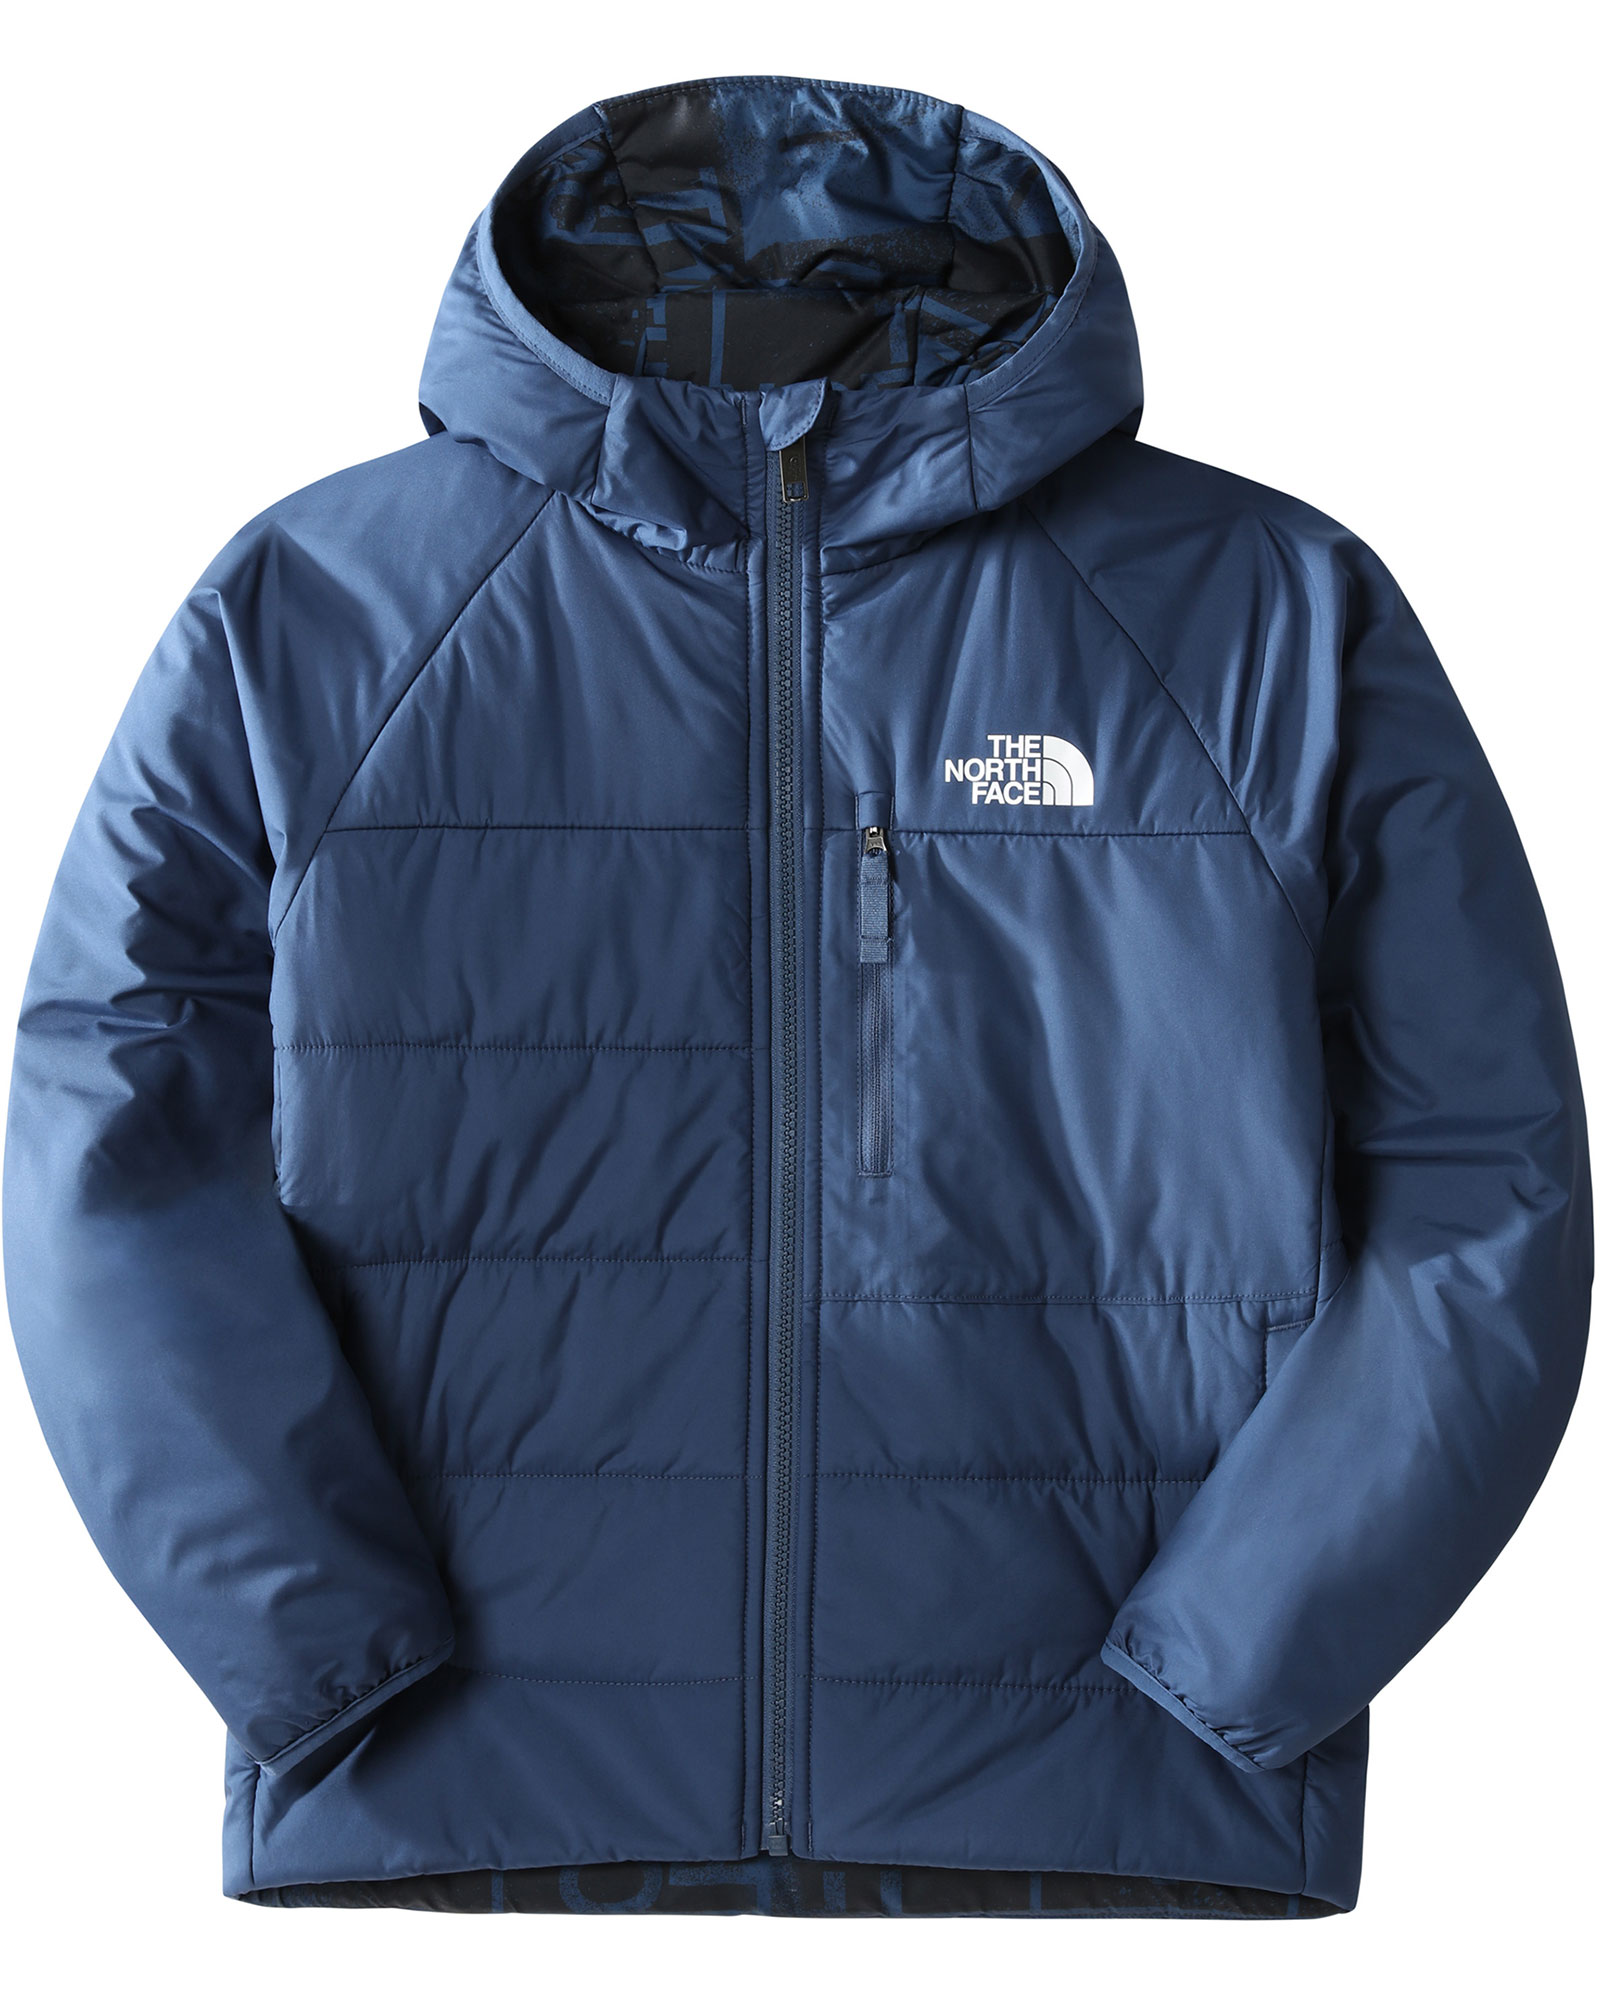 Product image of The North Face Reversible Perrito Kids' Jacket XL